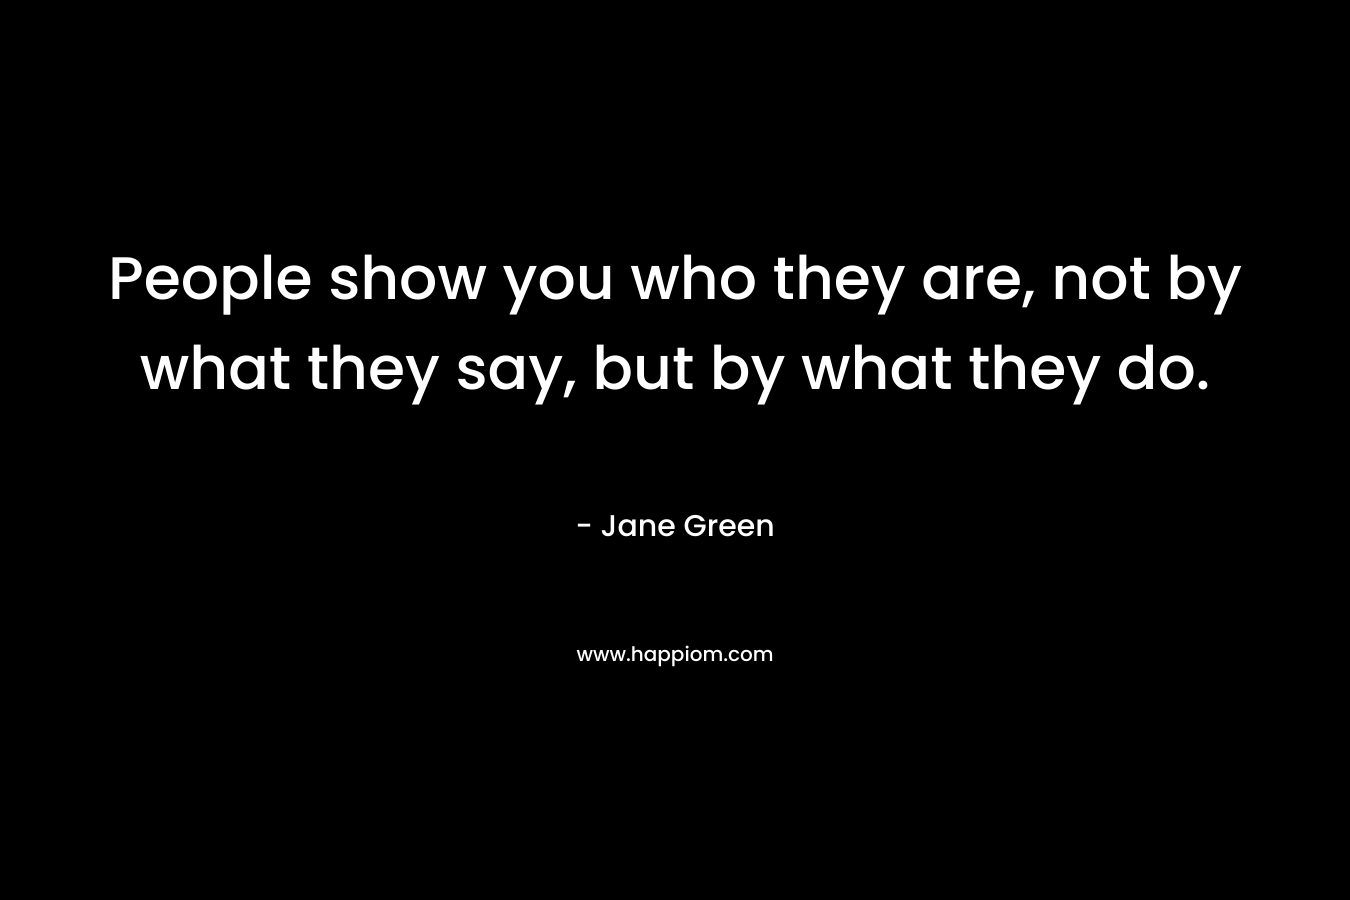 People show you who they are, not by what they say, but by what they do.